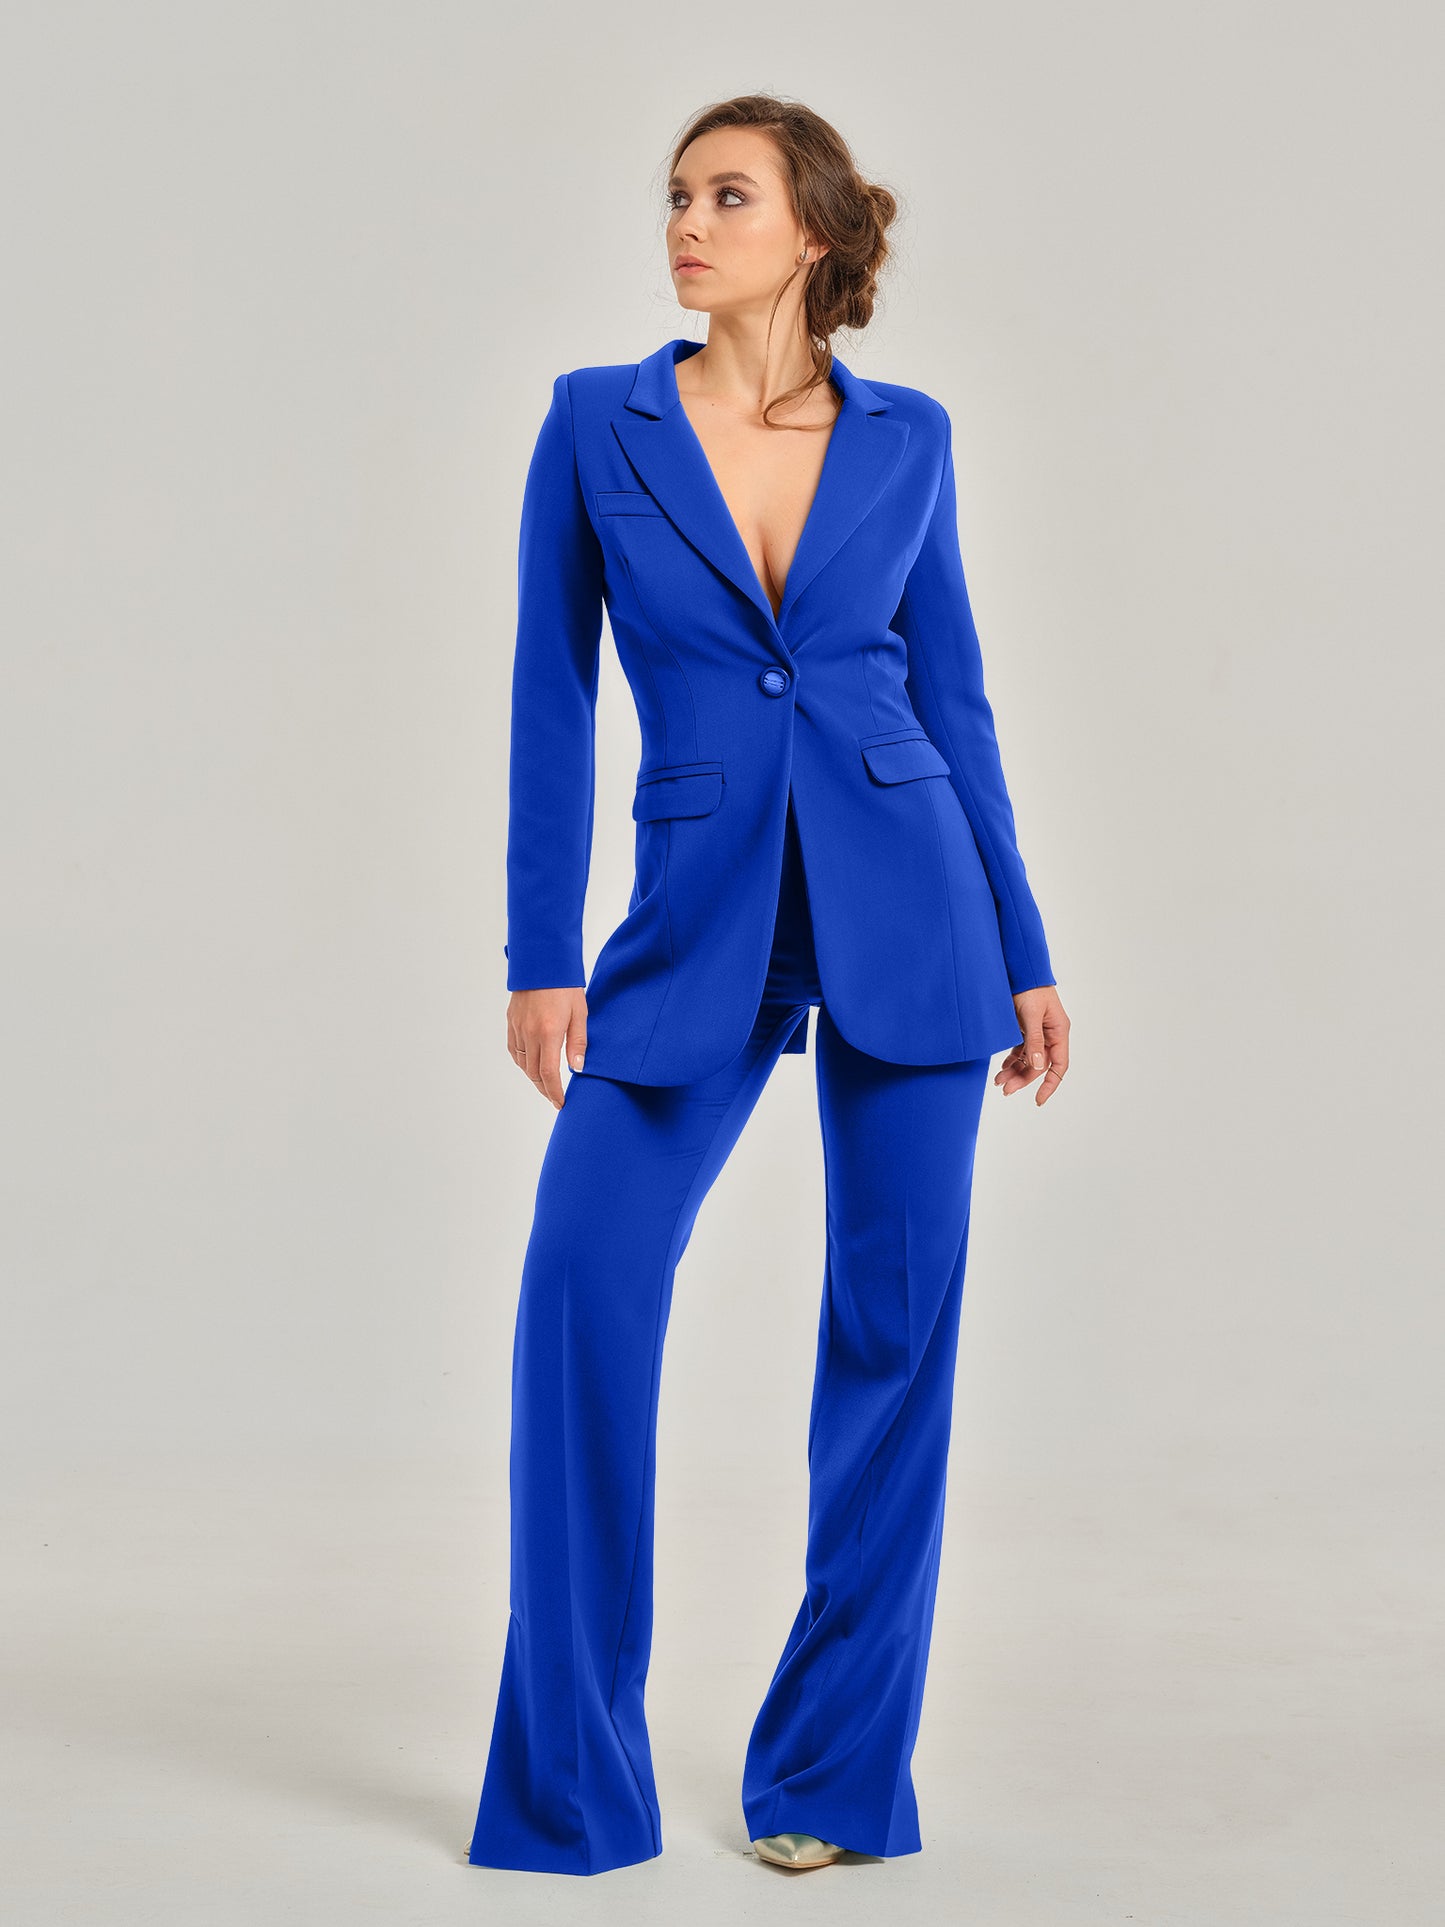 Royal Azure Timeless Power Suit